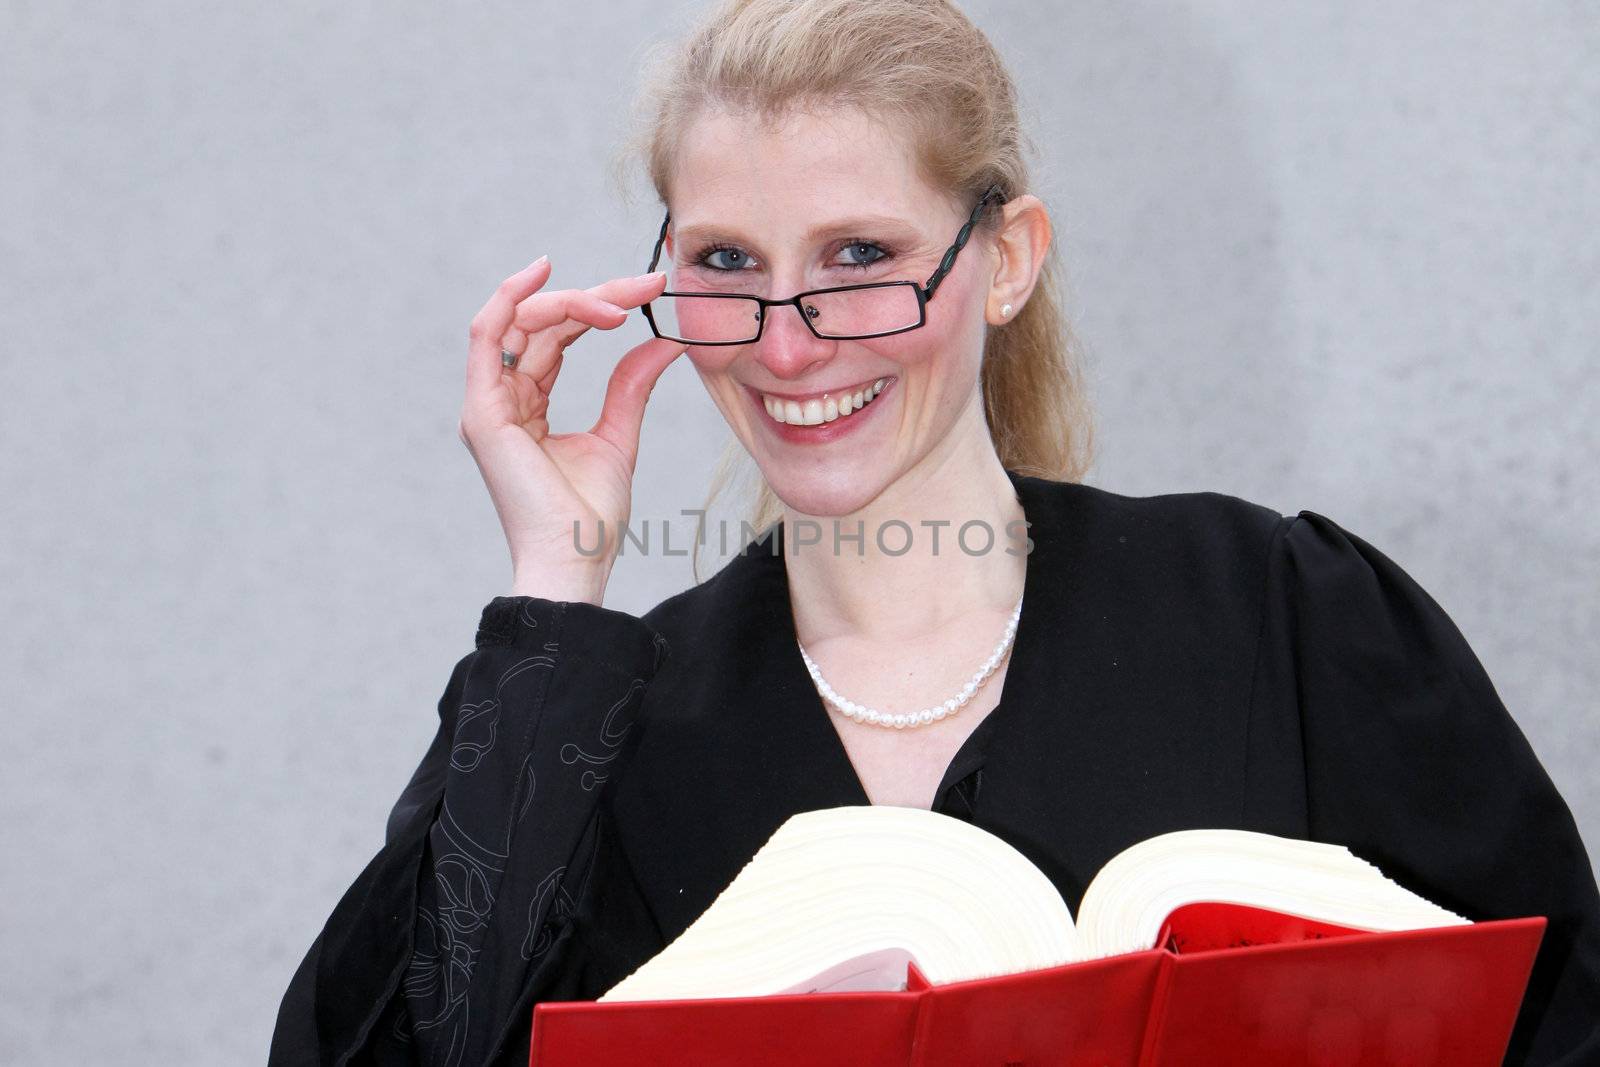 Law student holds a red book, laughing and looking towards the camera
